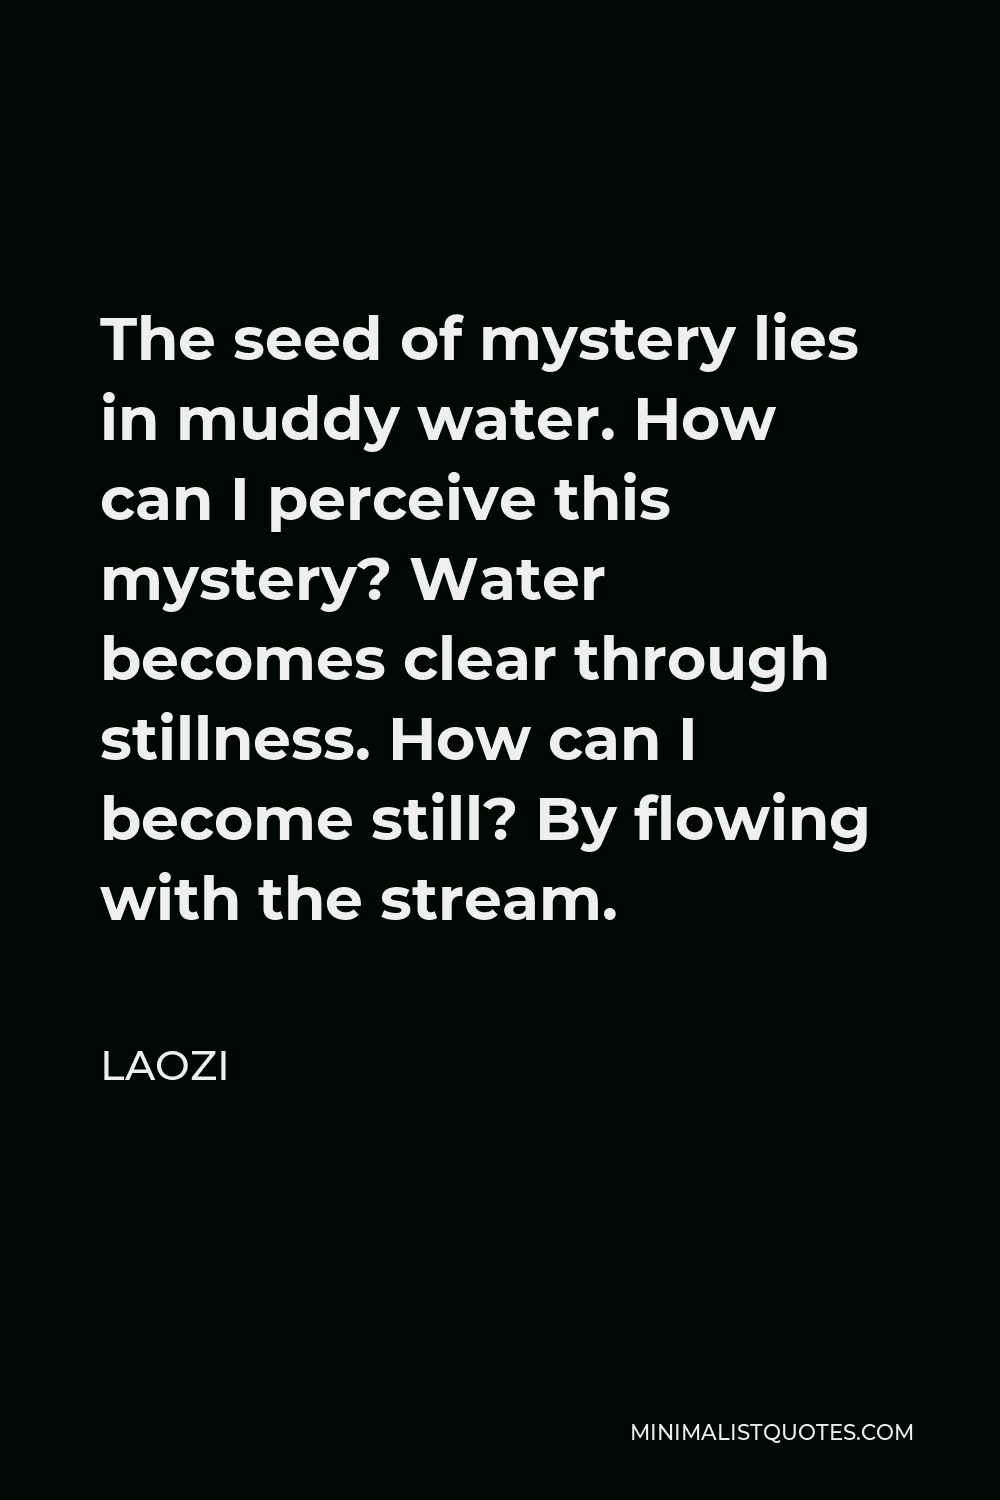 Laozi Quote - The seed of mystery lies in muddy water. How can I perceive this mystery? Water becomes clear through stillness. How can I become still? By flowing with the stream.